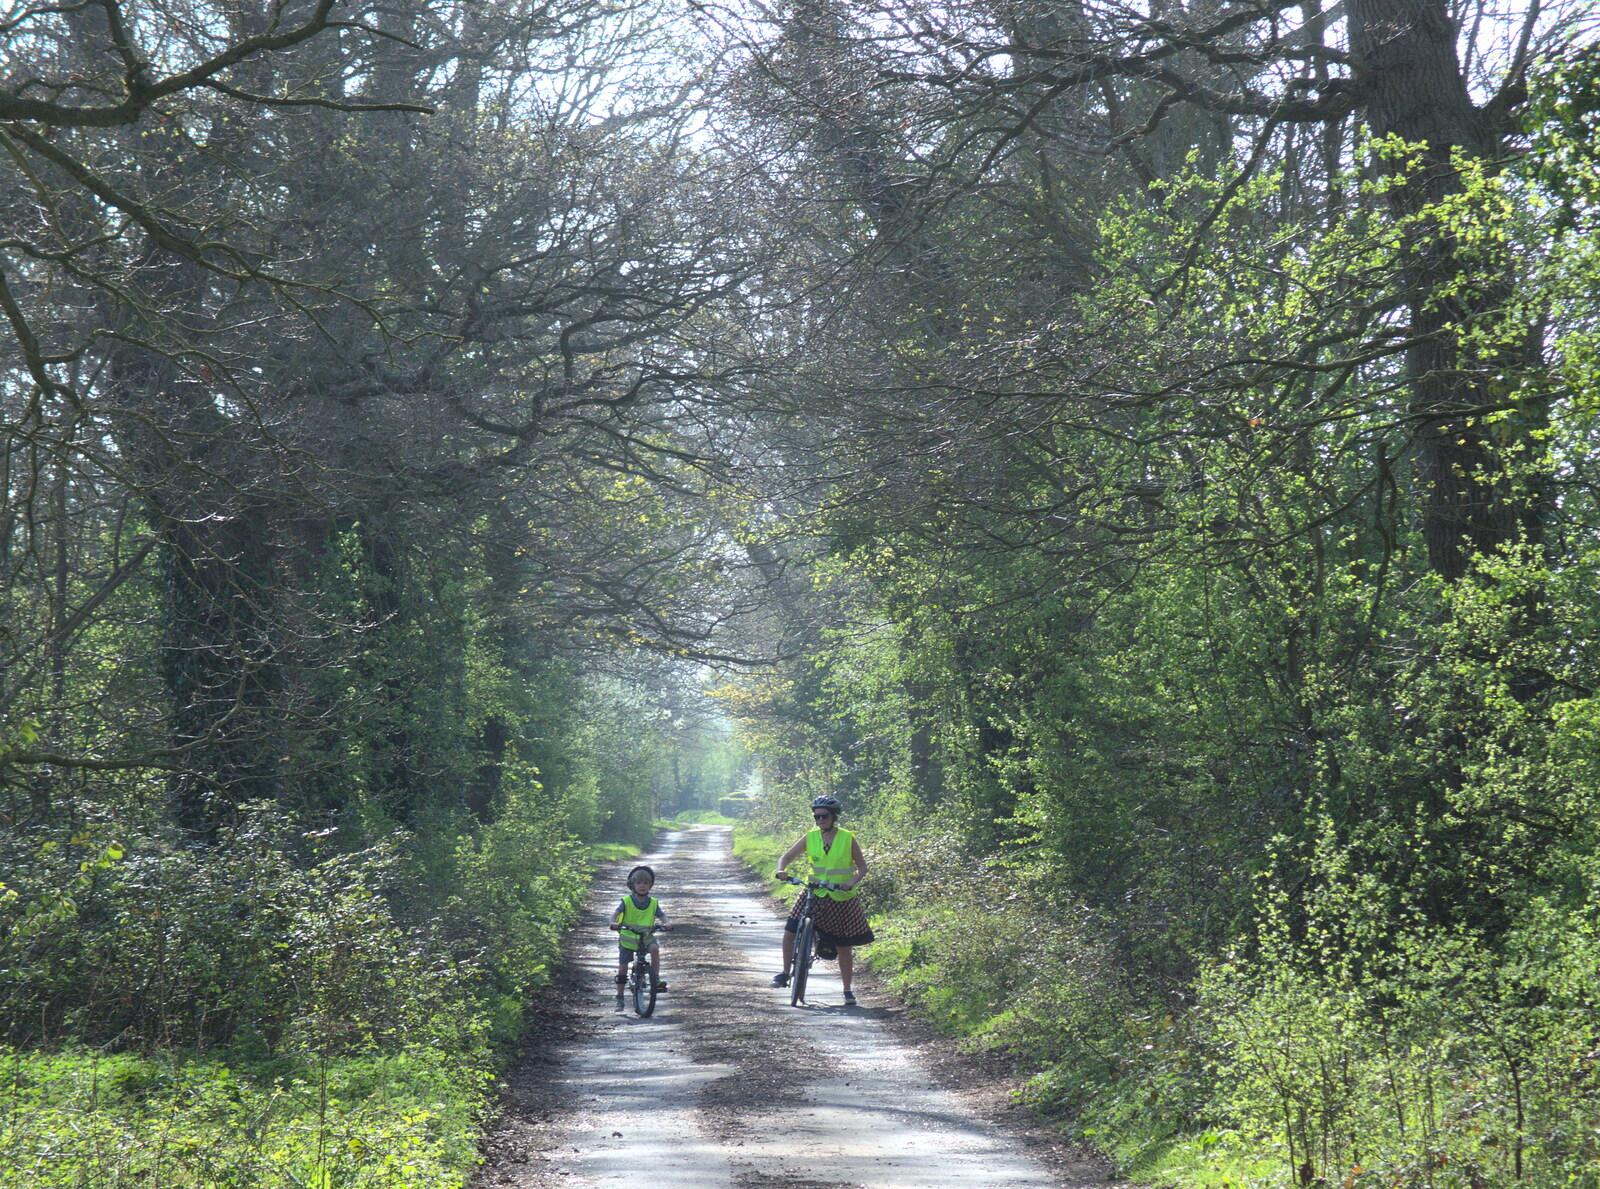 Harry and Isobel from Cycling to Bigod's Castle, Eye, Suffolk - 9th April 2017